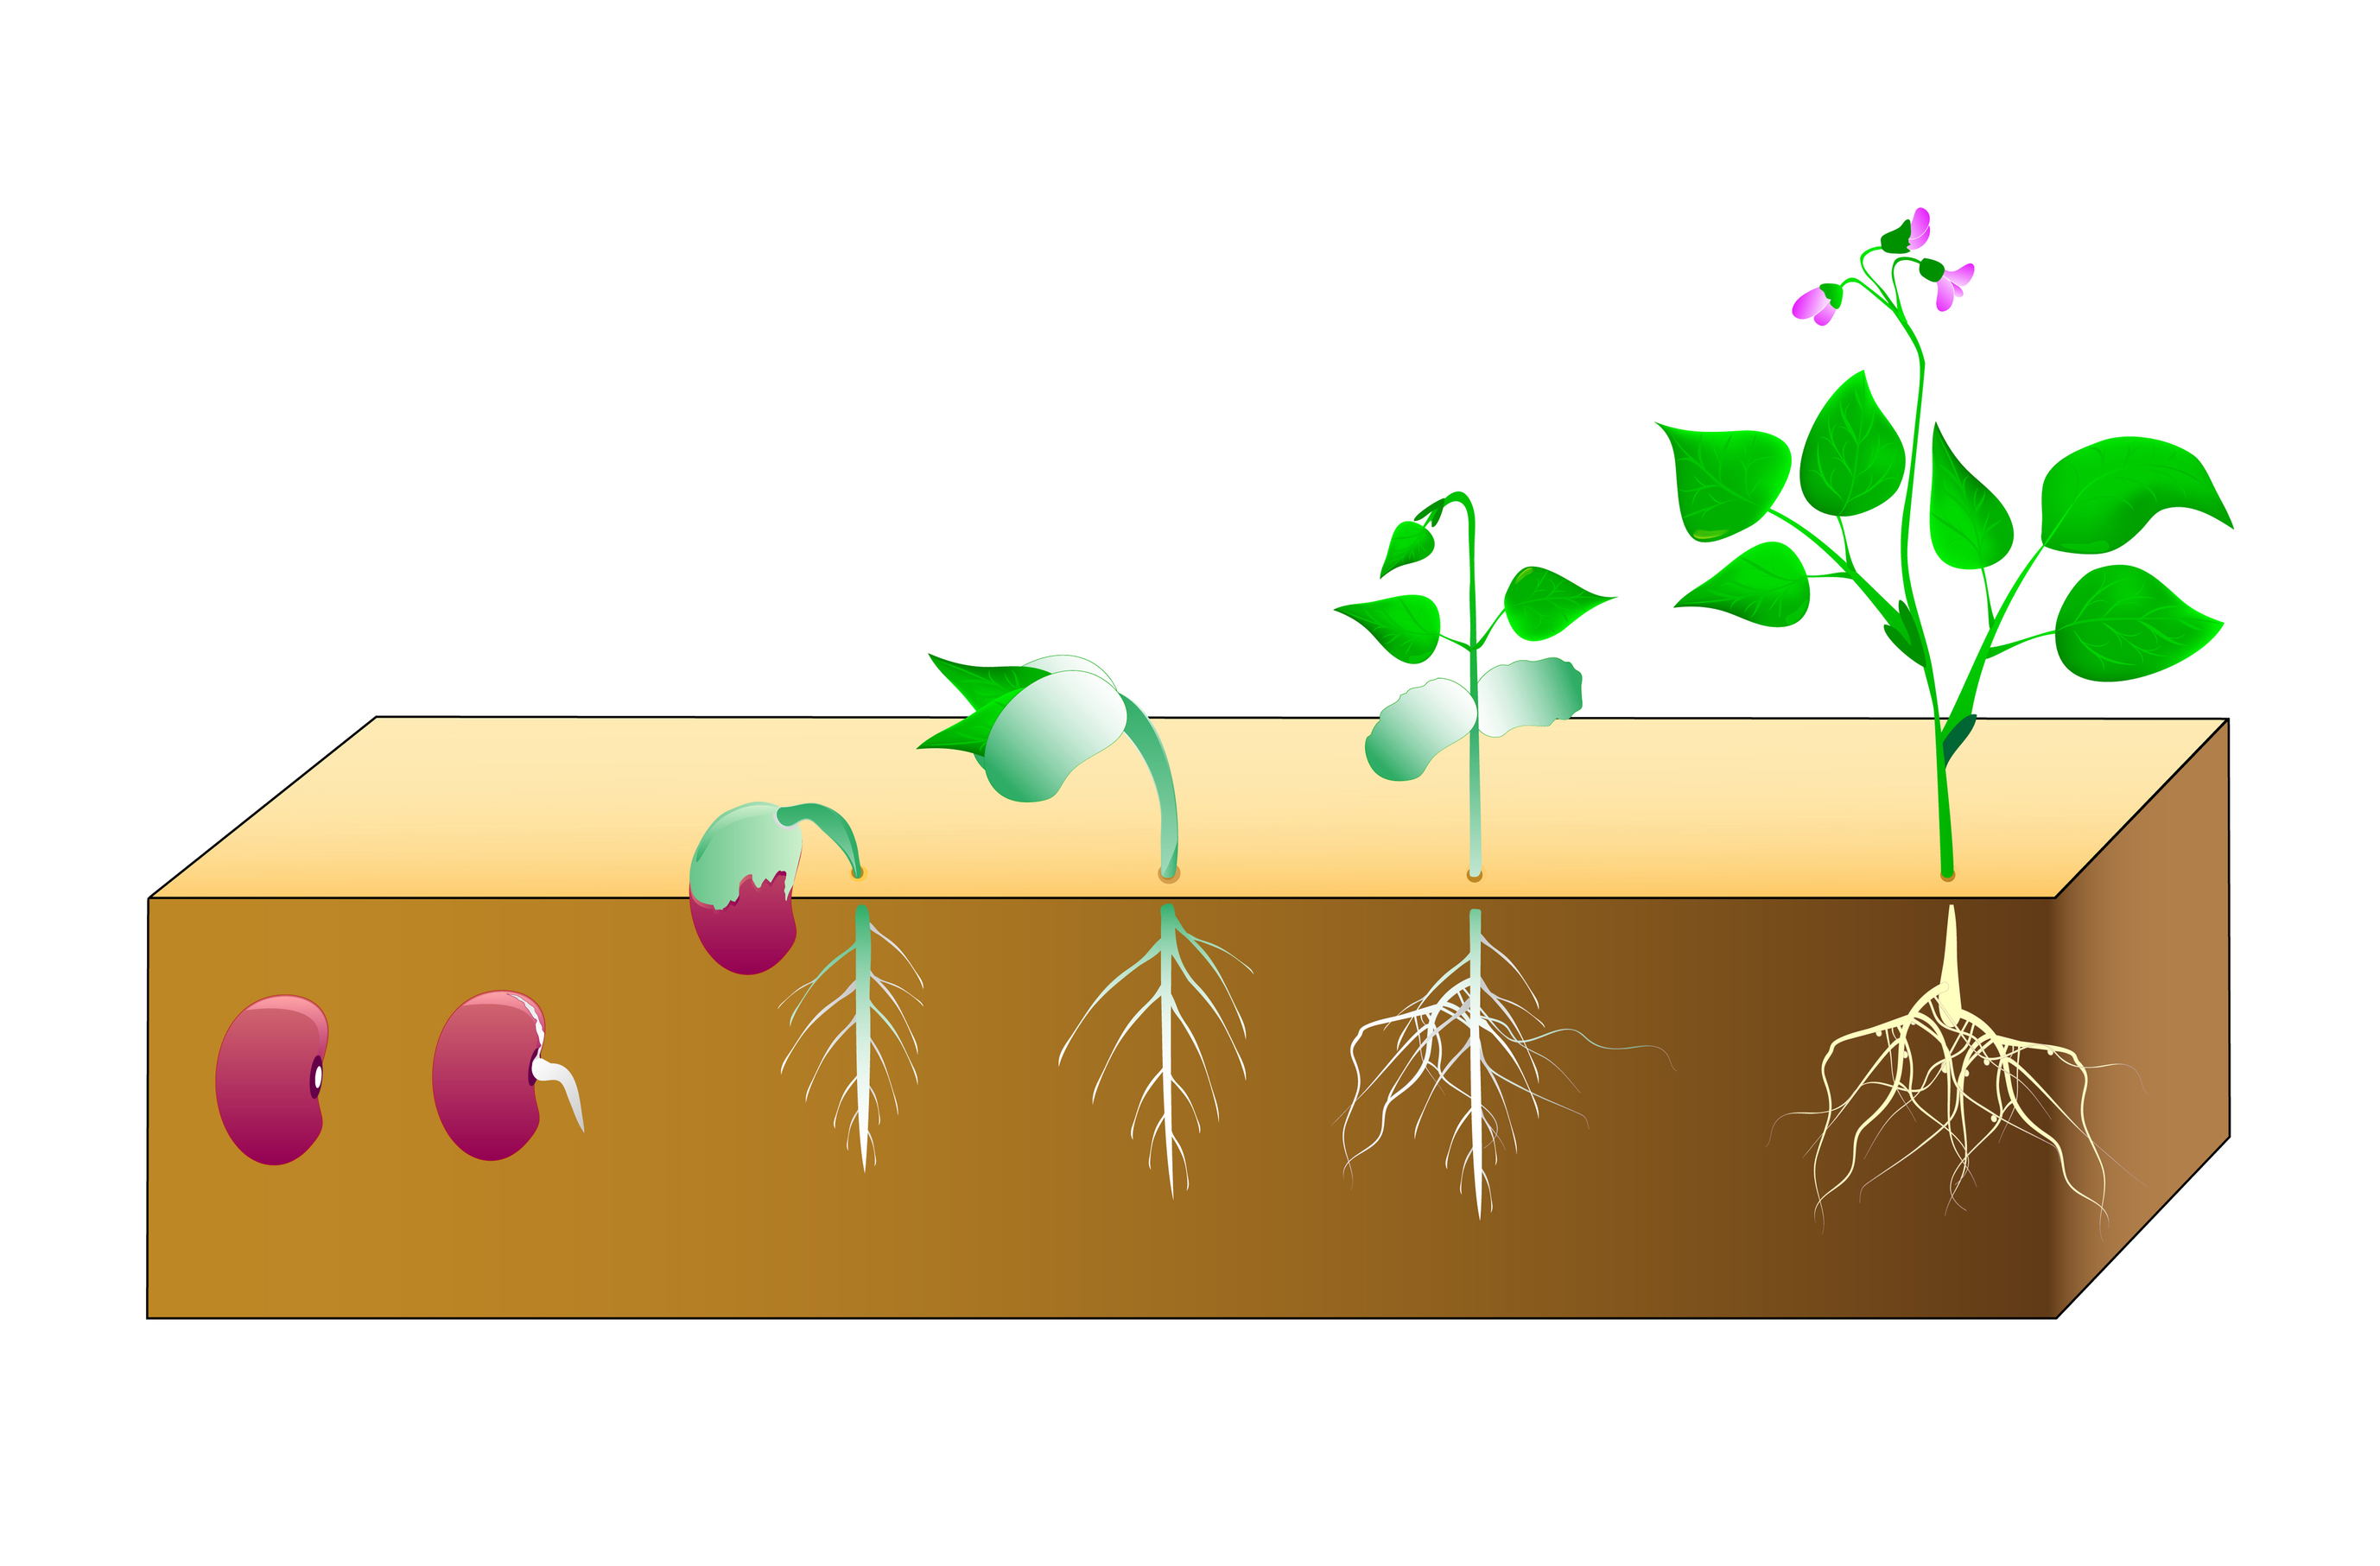 plant life cycle clipart - photo #31